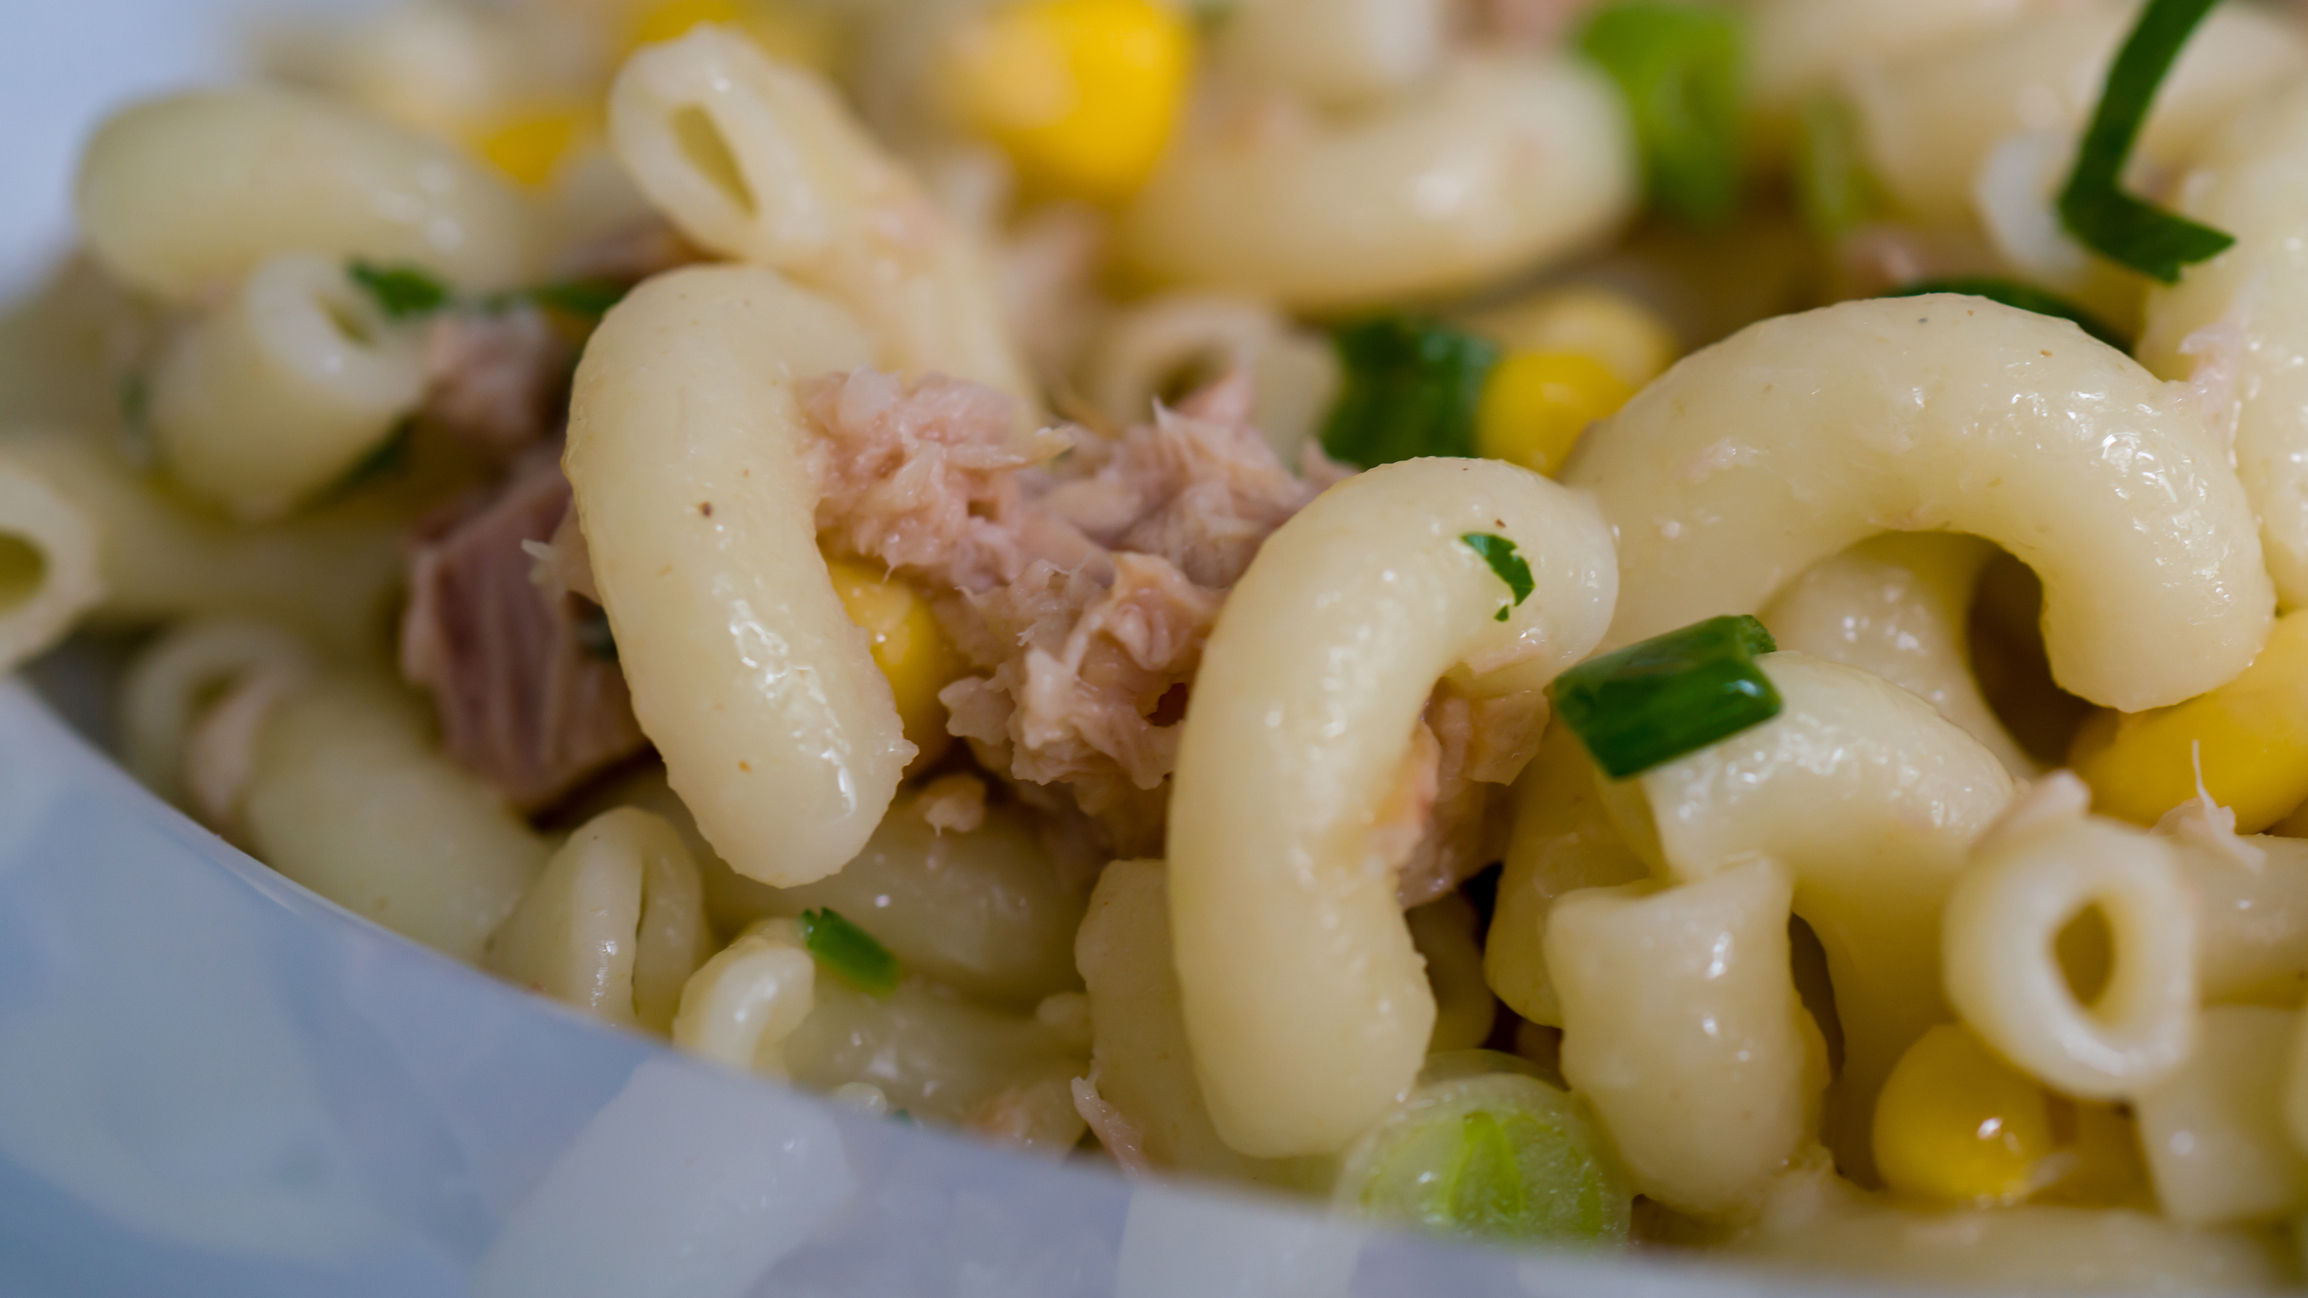 A close-up of a tuna macaroni salad with corn and diced green onions